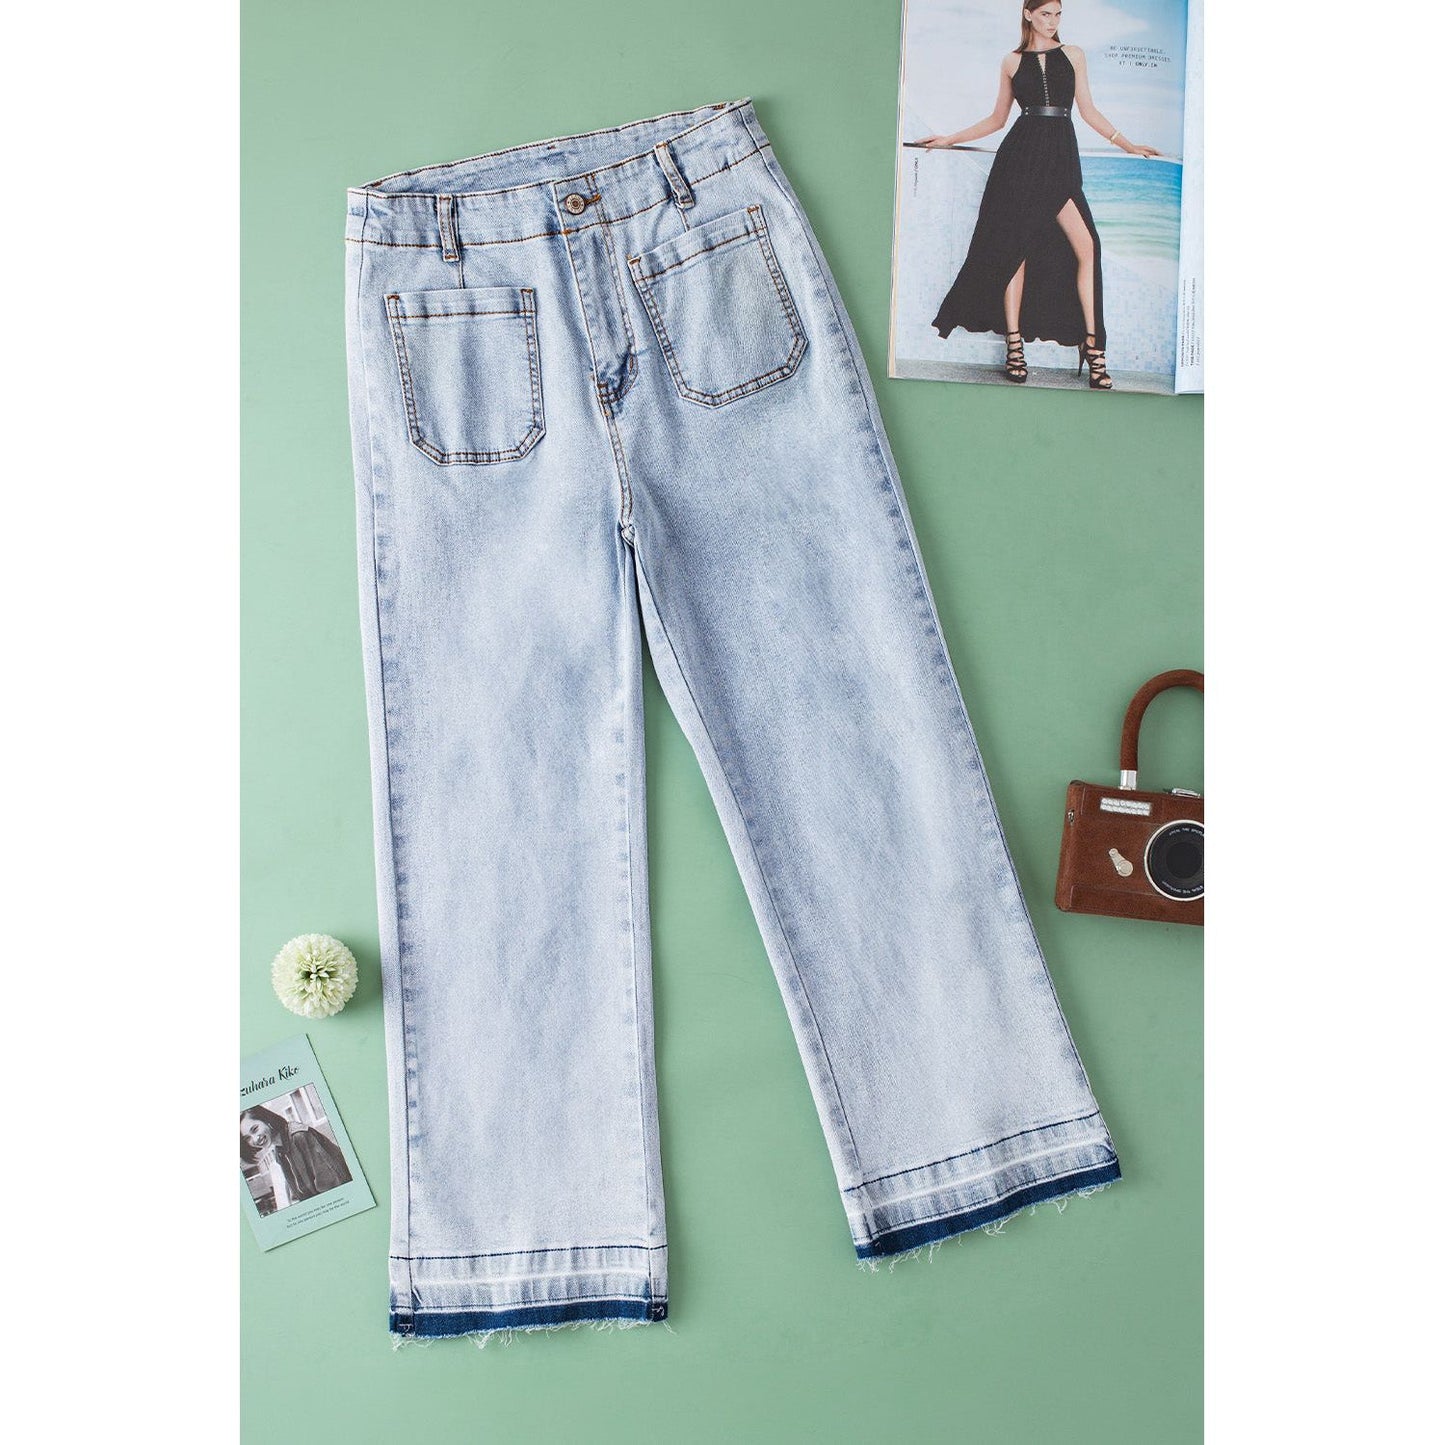 Walk This Way Blue Acid Wash Contrast Edge Cropped Jeans